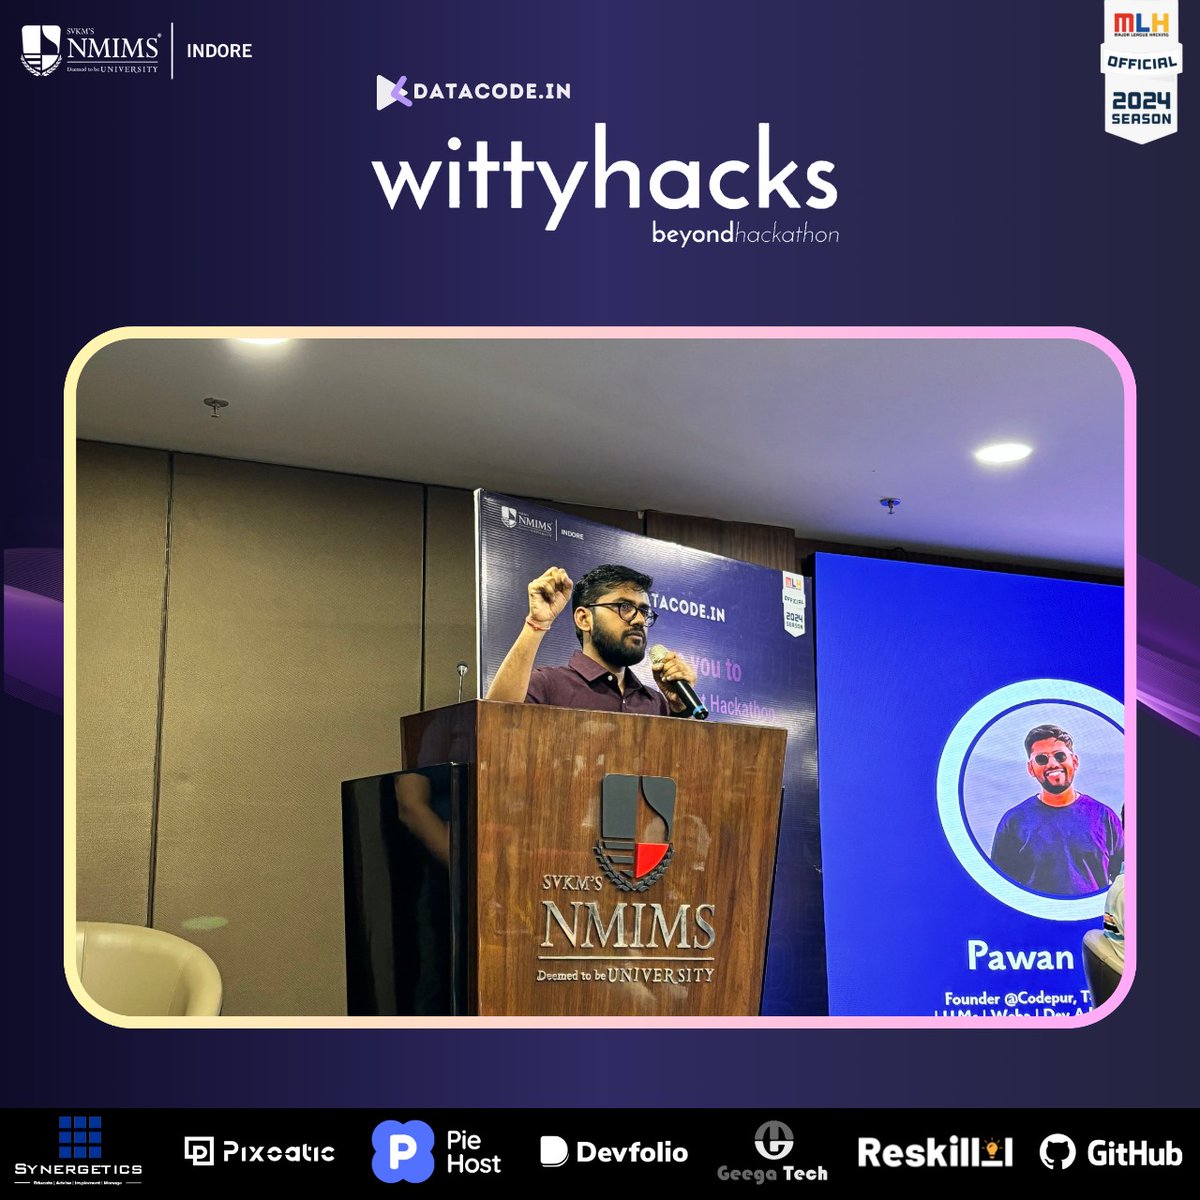 Elevated the entire event! Pawan Kumar's keynote was overflowing with insights and inspiration. Their presence truly made a difference. ✨ The amount of joy was visibly flowing from the participant's reactions at WittyHacks 4.0! 🔥